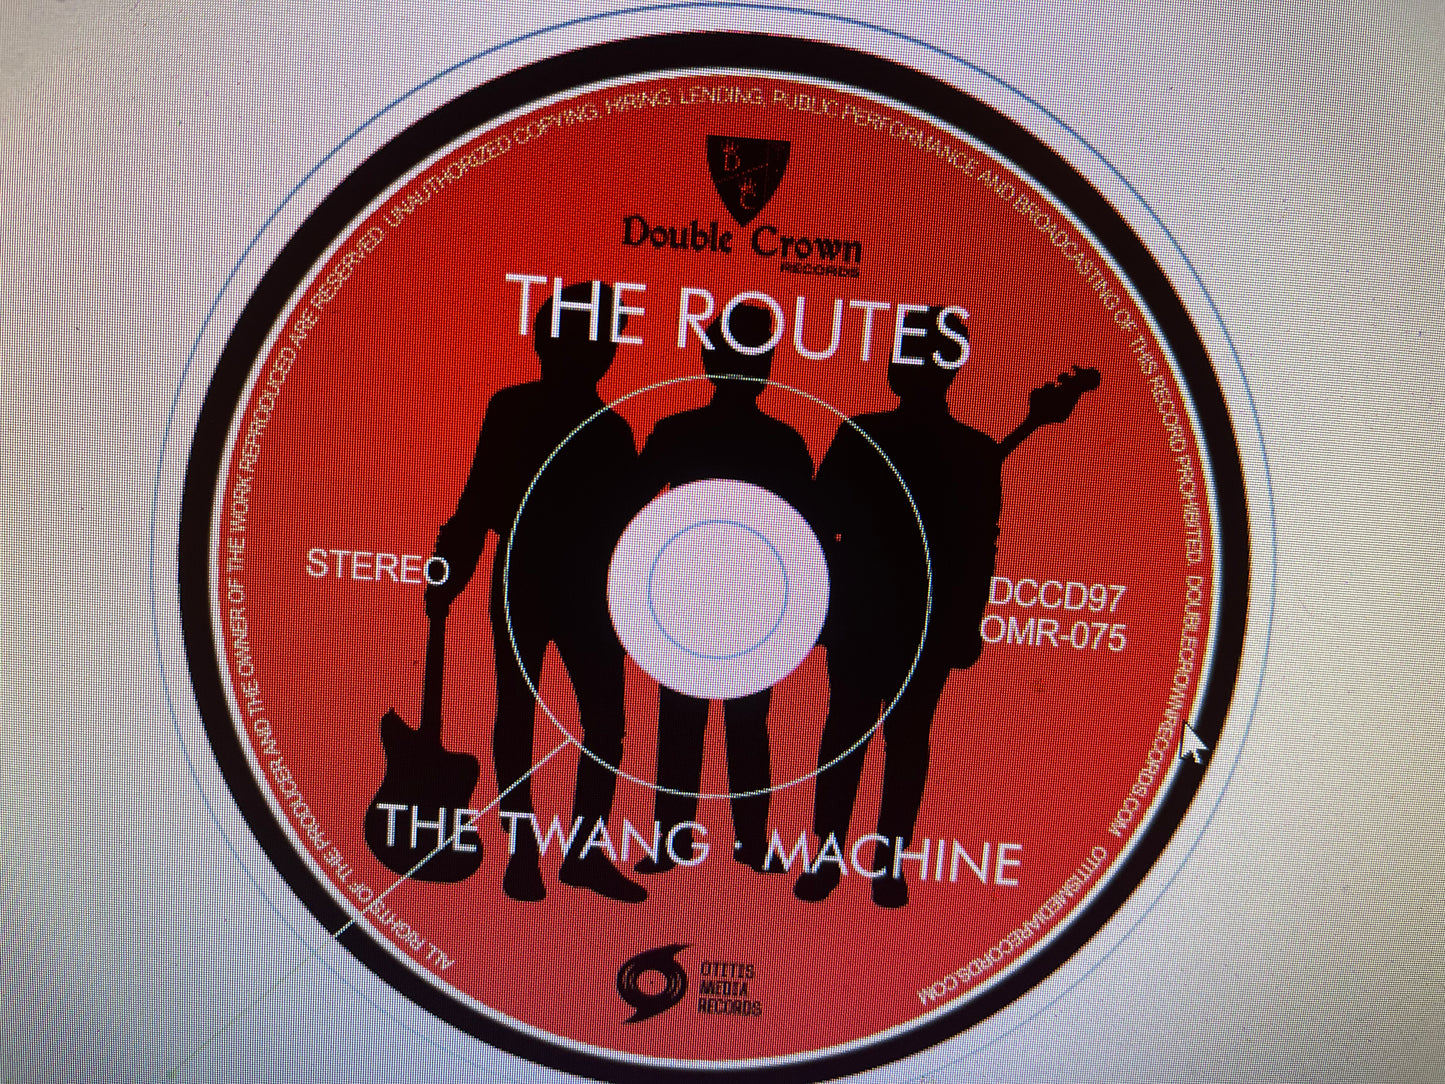 OMR-075 The Routes “The Twang Machine” CD